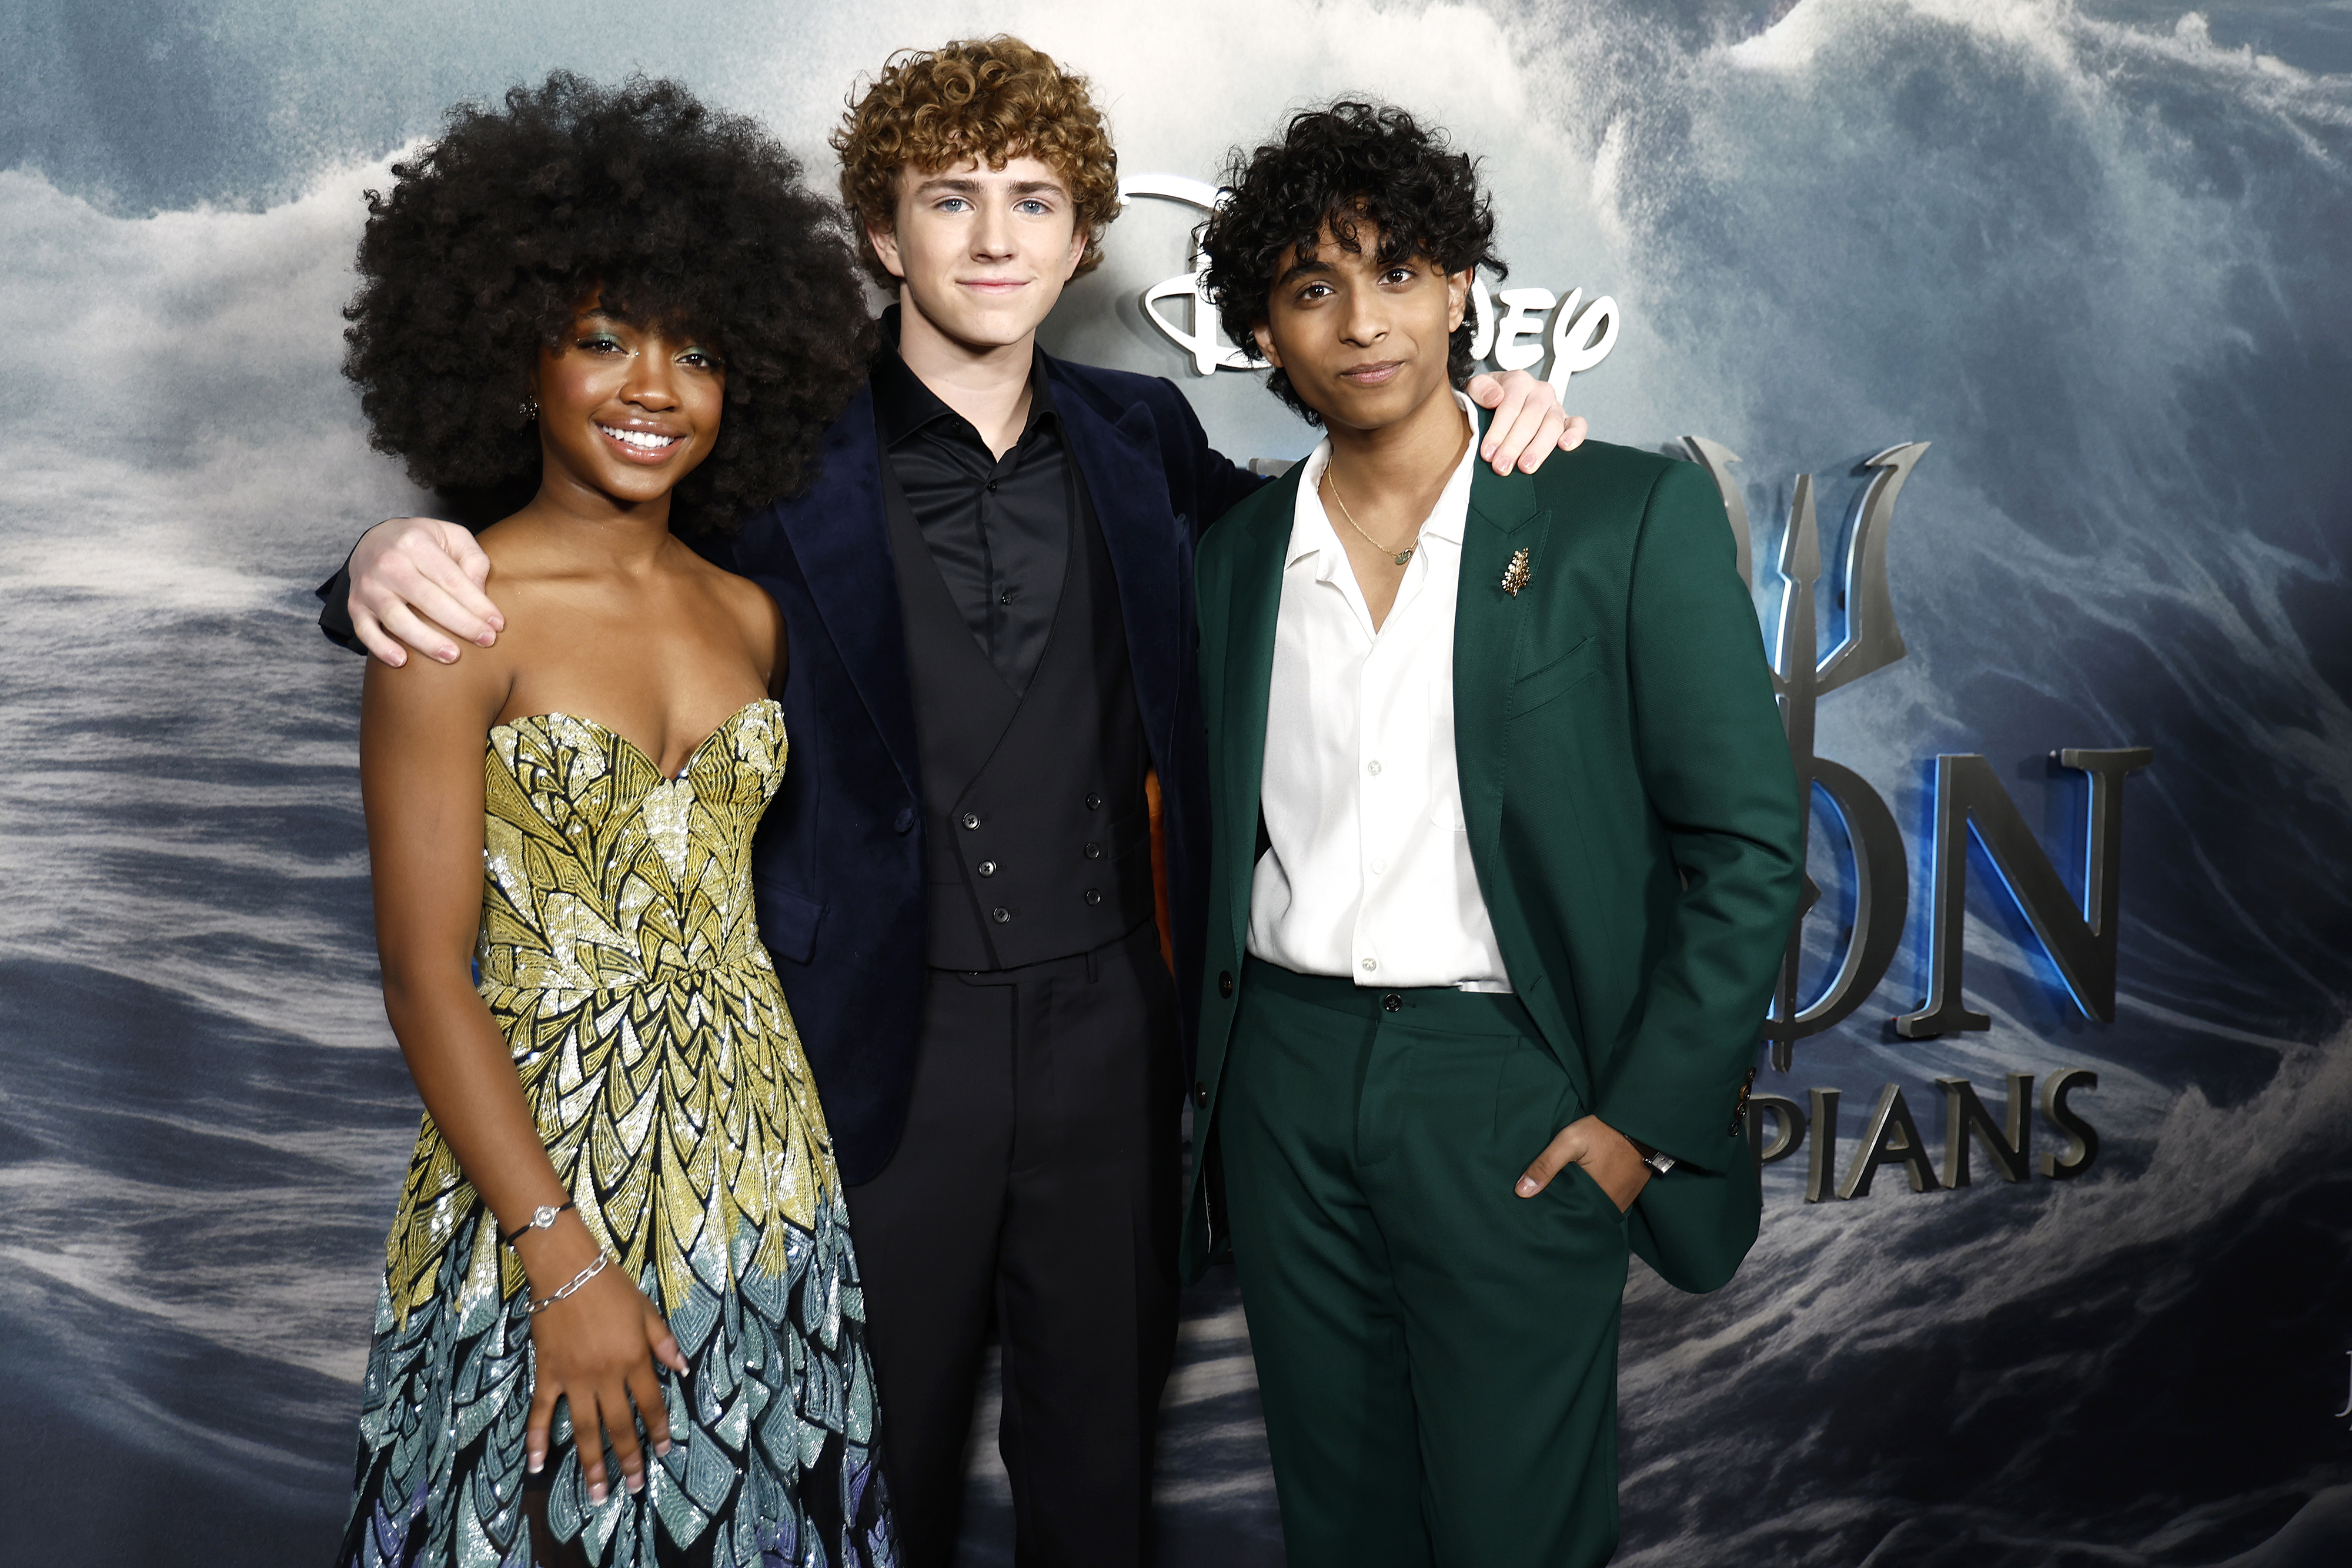 The cast of Percy Jackson on the red carpet